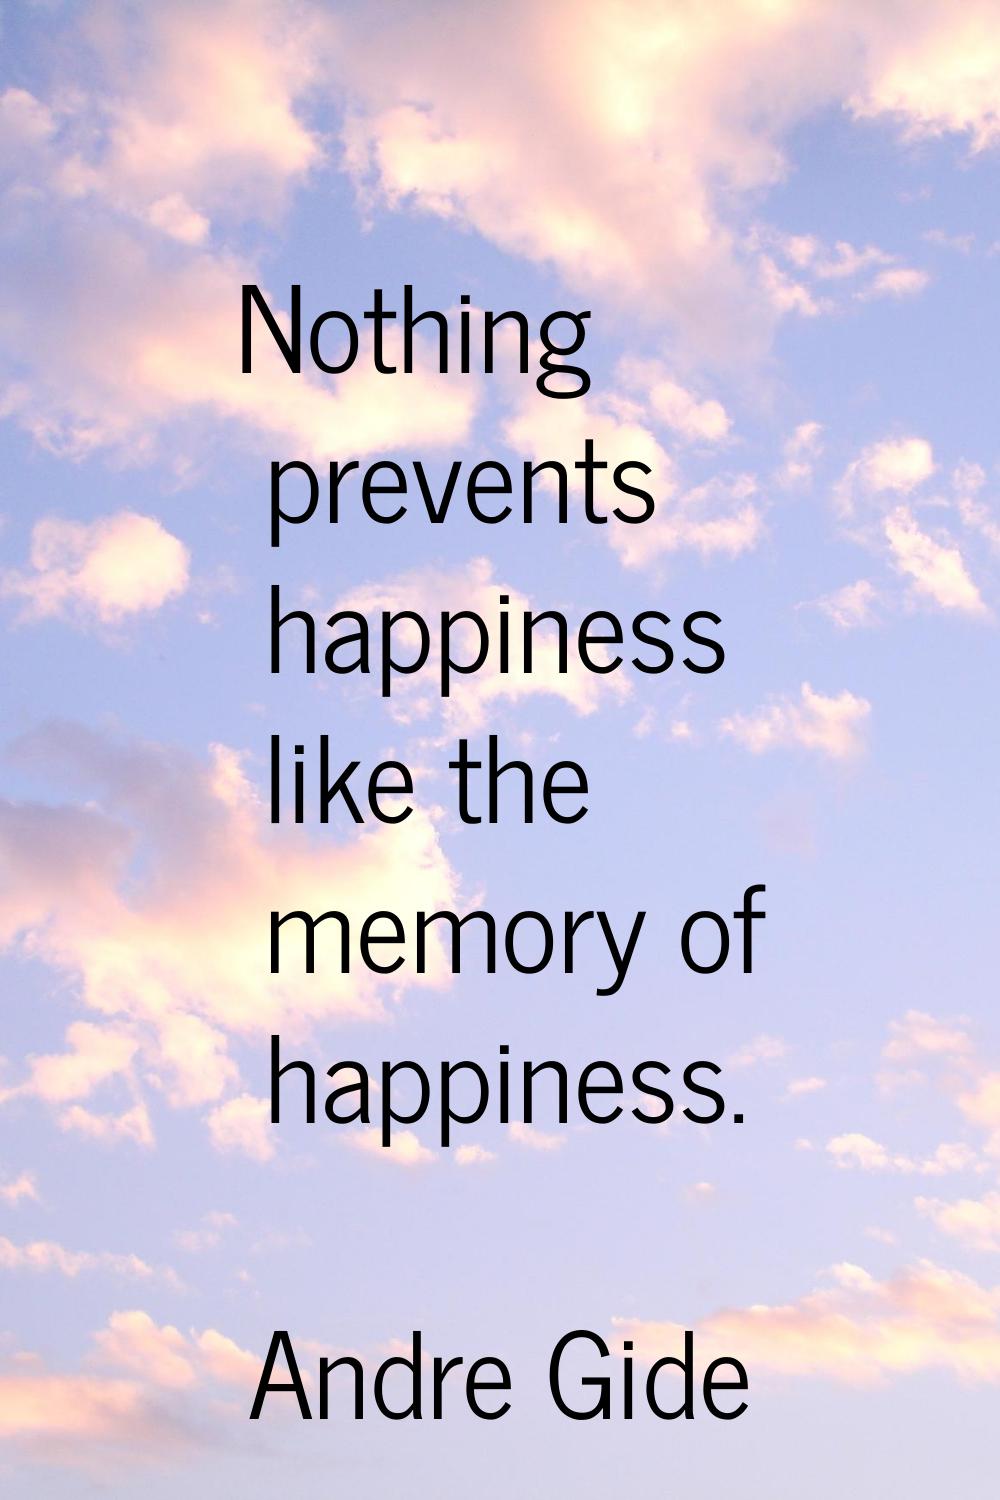 Nothing prevents happiness like the memory of happiness.